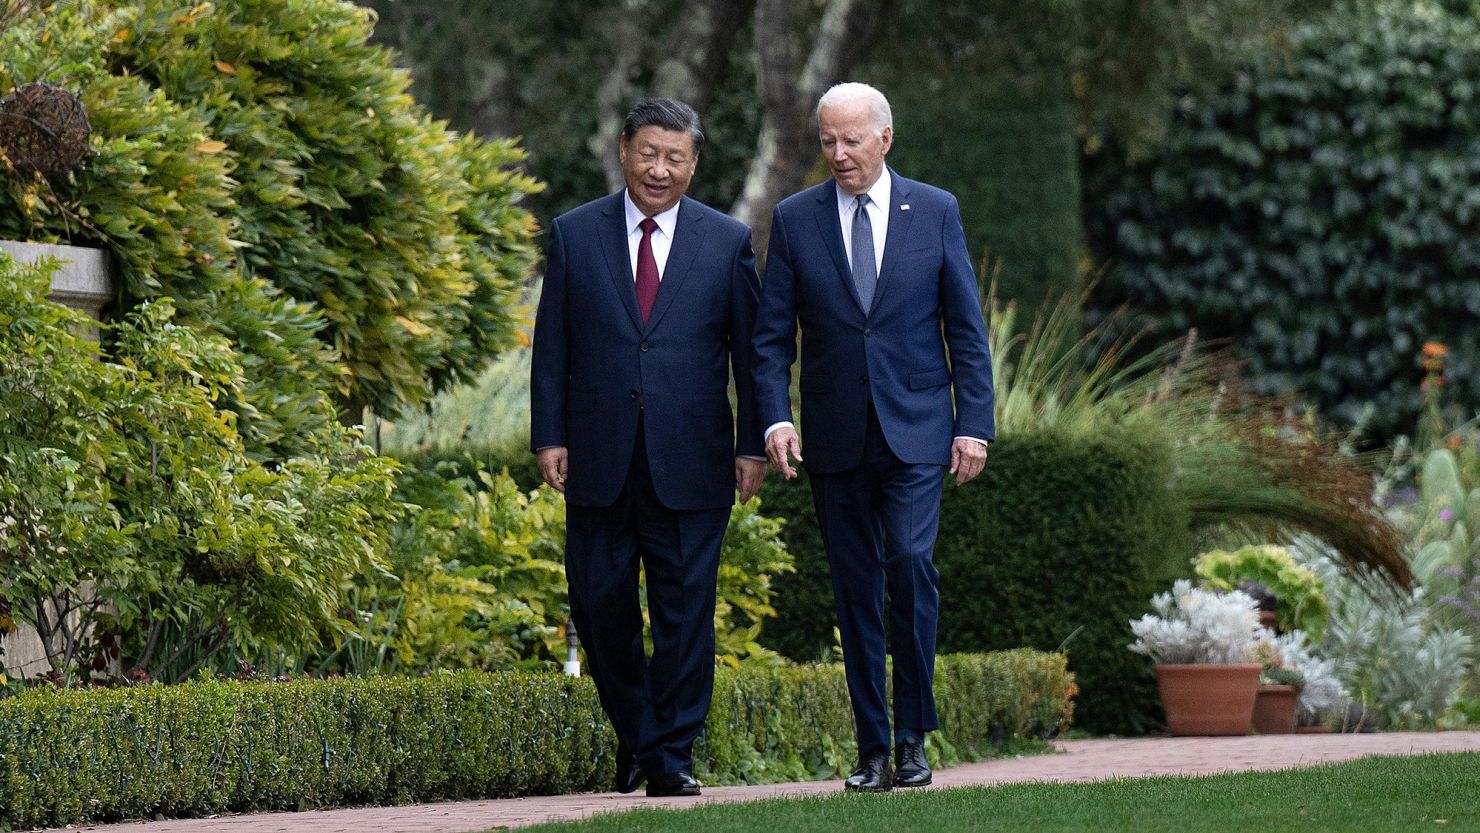 US President Joe Biden and Chinese President Xi Jinping walk together after a meeting during the Asia-Pacific Economic Cooperation (APEC) Leaders' week in Woodside, California on November 15, 2023.